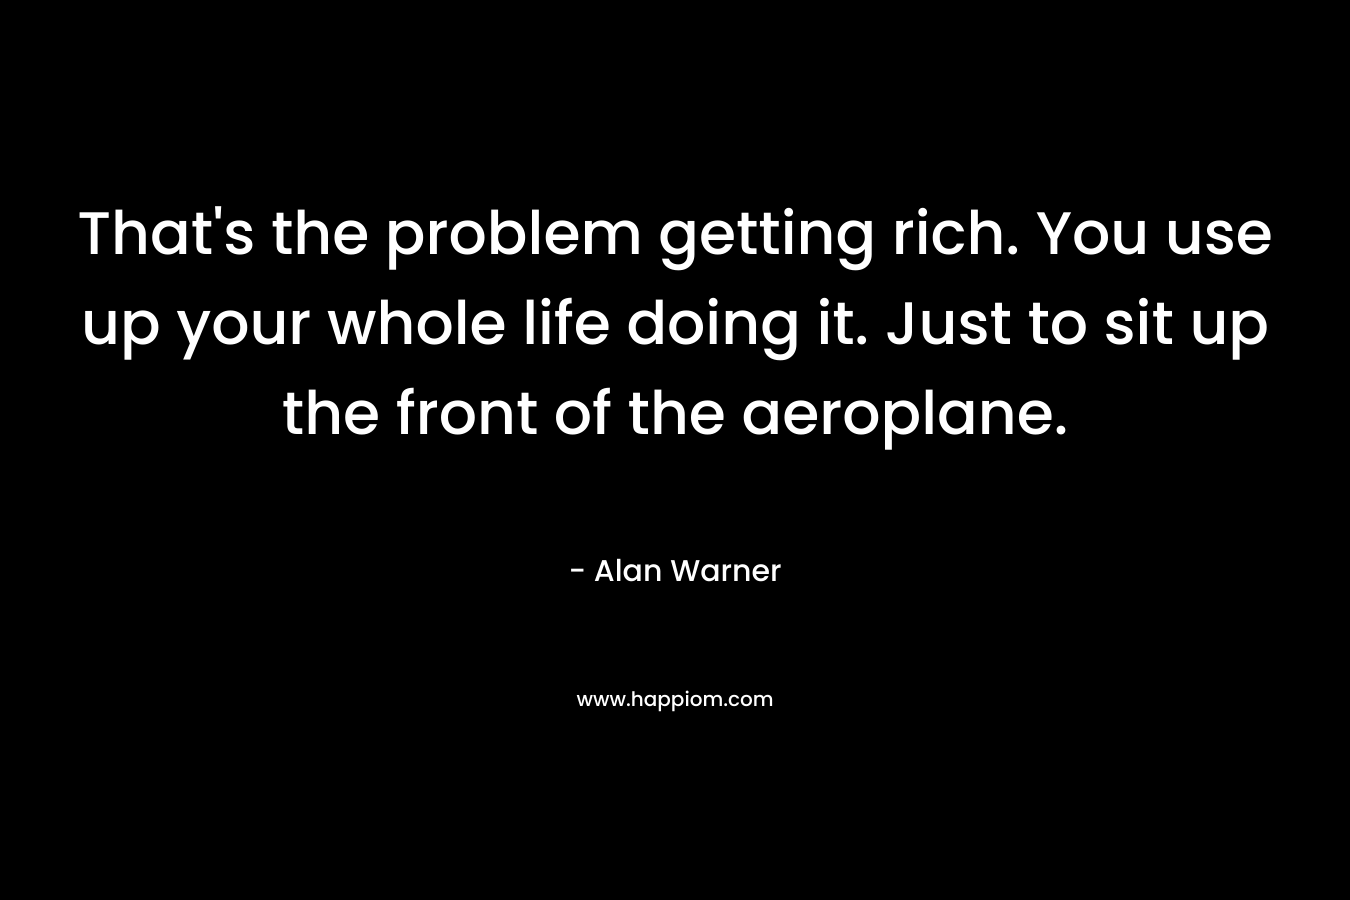 That’s the problem getting rich. You use up your whole life doing it. Just to sit up the front of the aeroplane. – Alan Warner